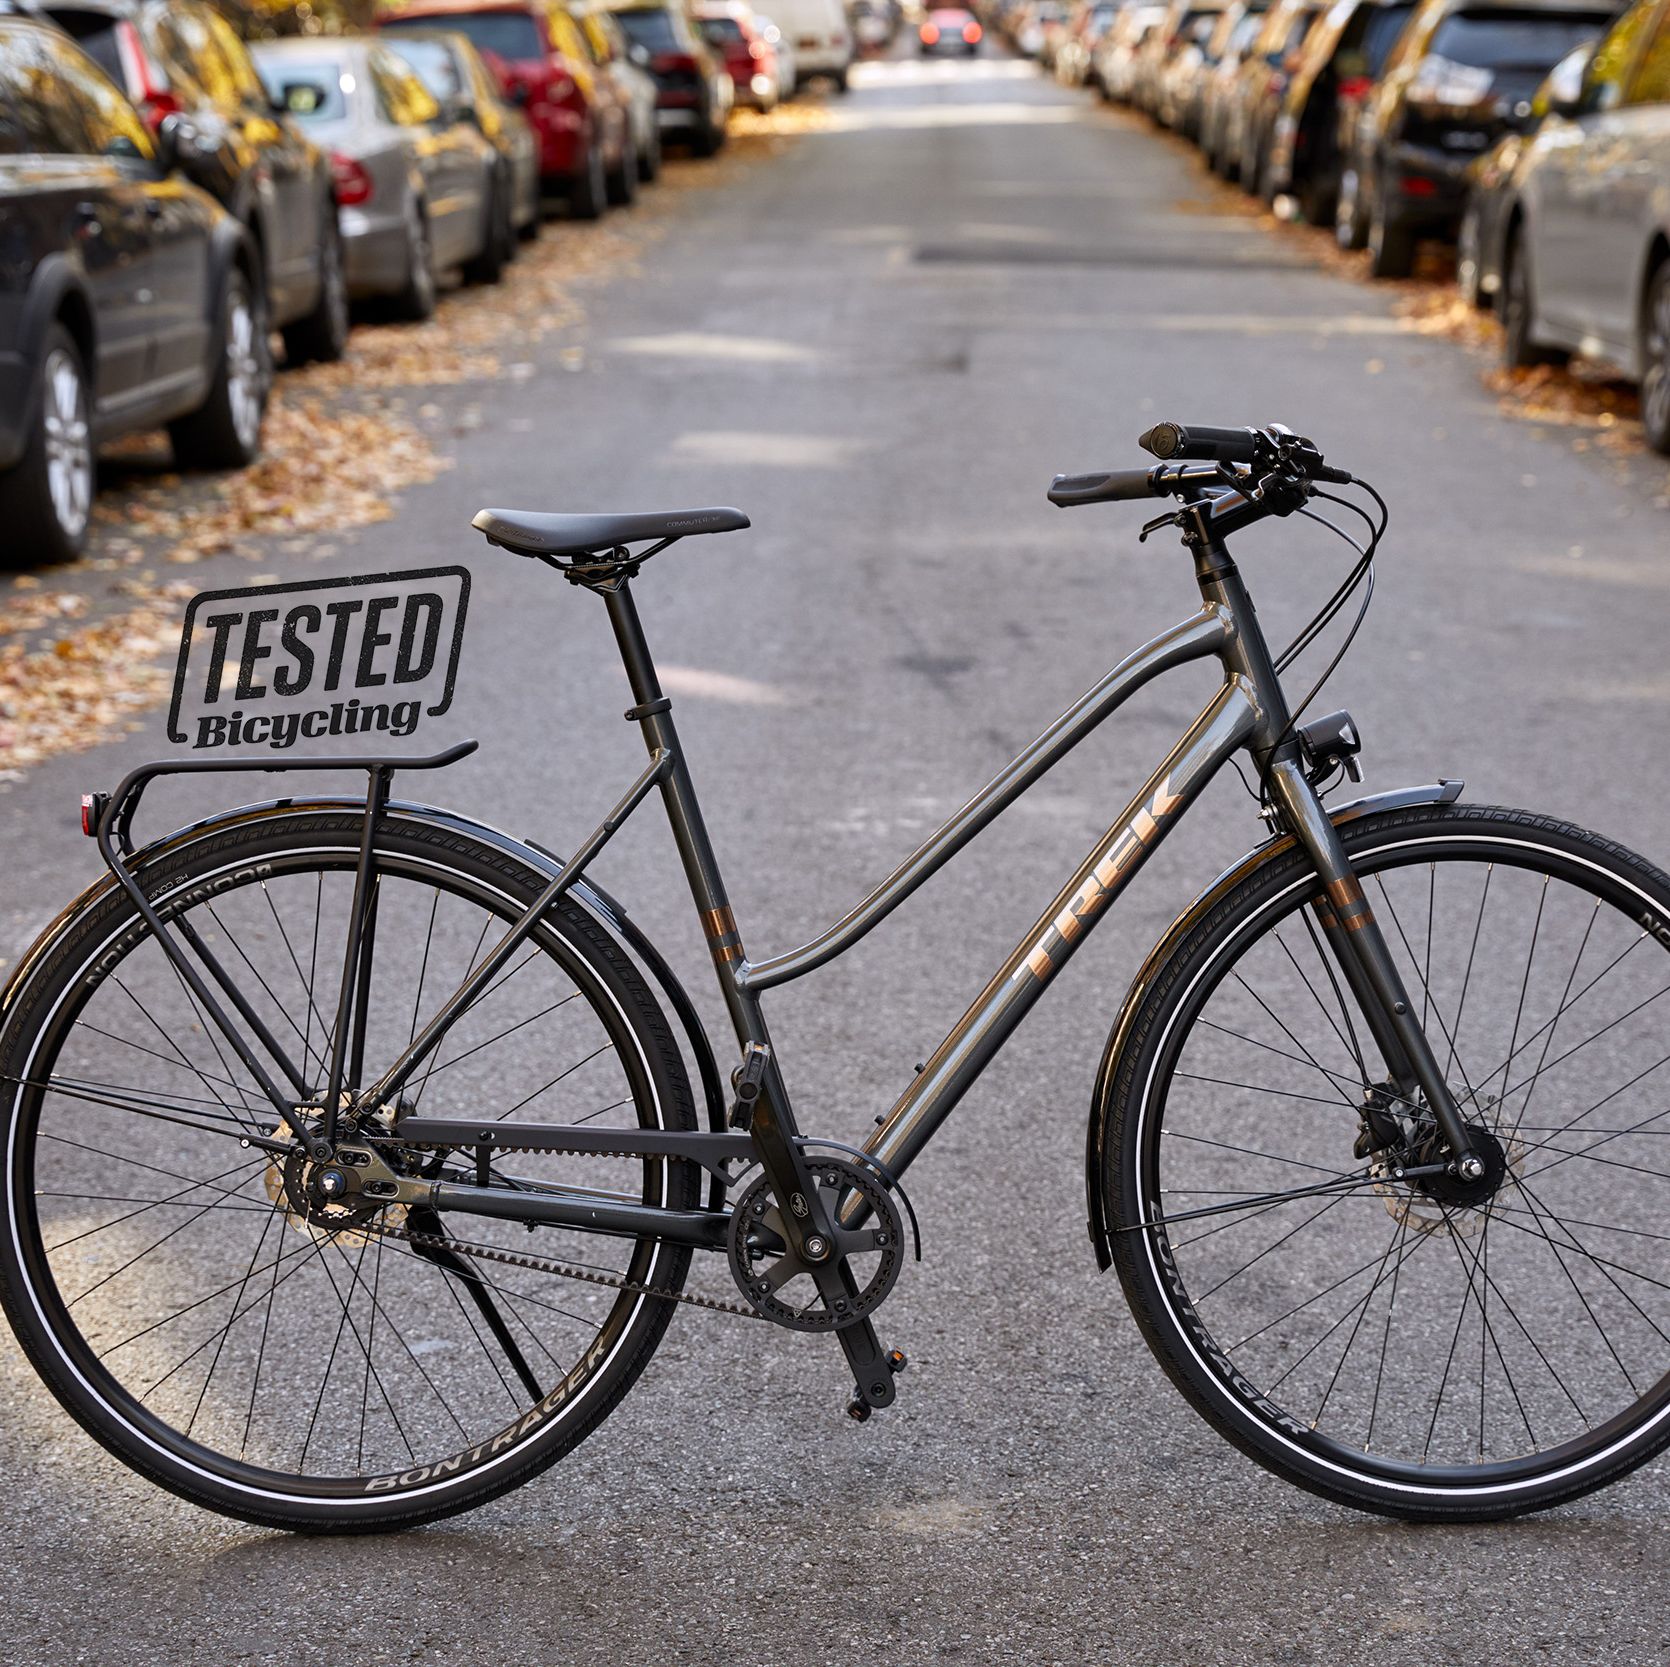 Equipped with everything needed for commuting, the Trek District 4 Stagger is a European-style commuter for bike lovers